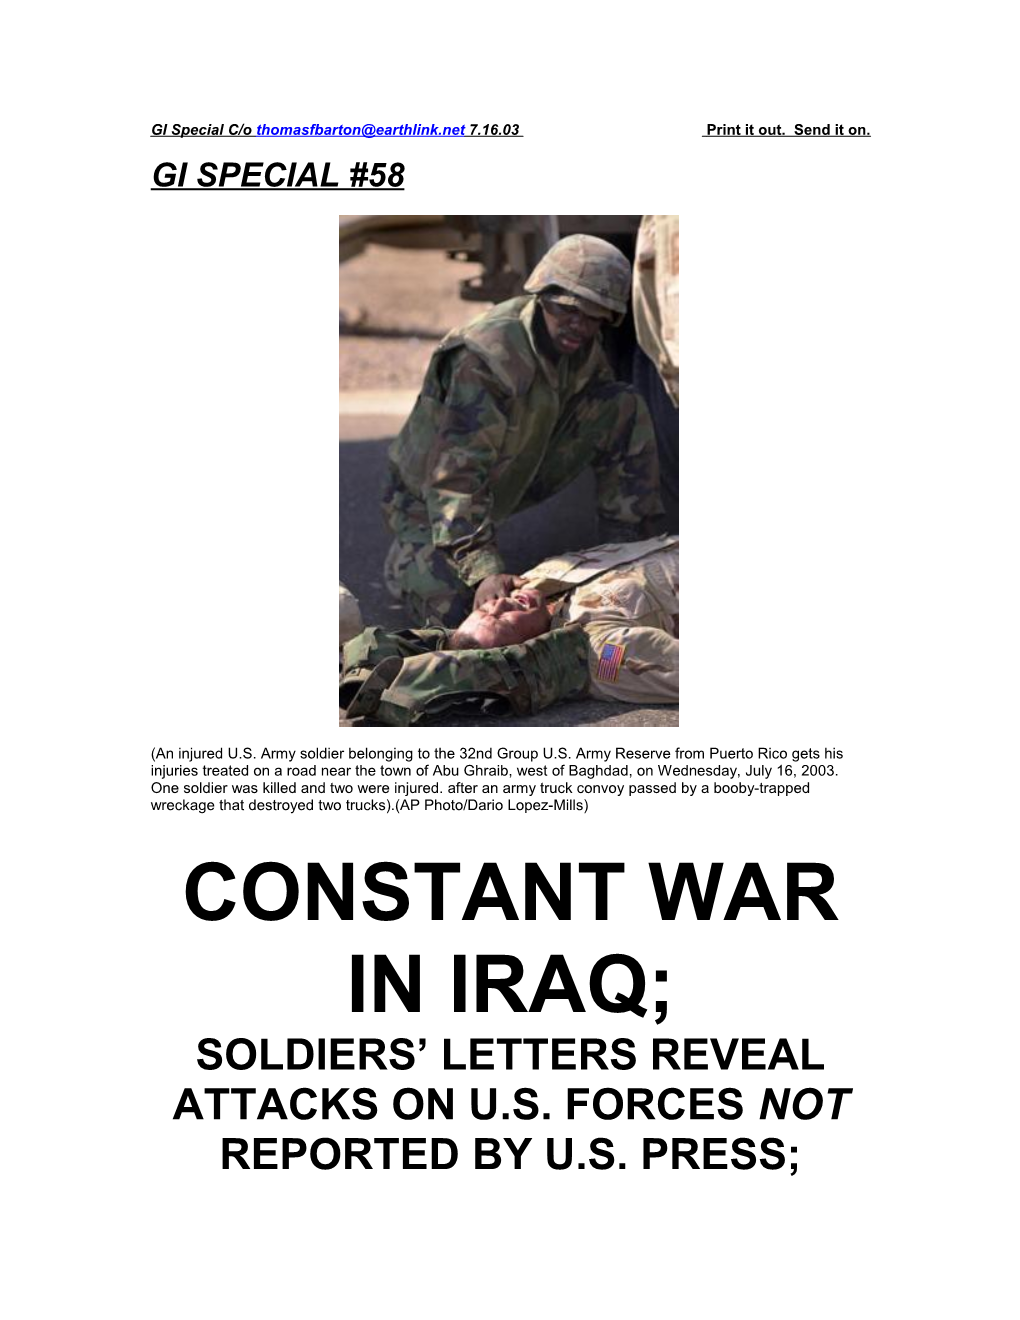 GI Special C/O 7.16.03 Print It Out. Send It On